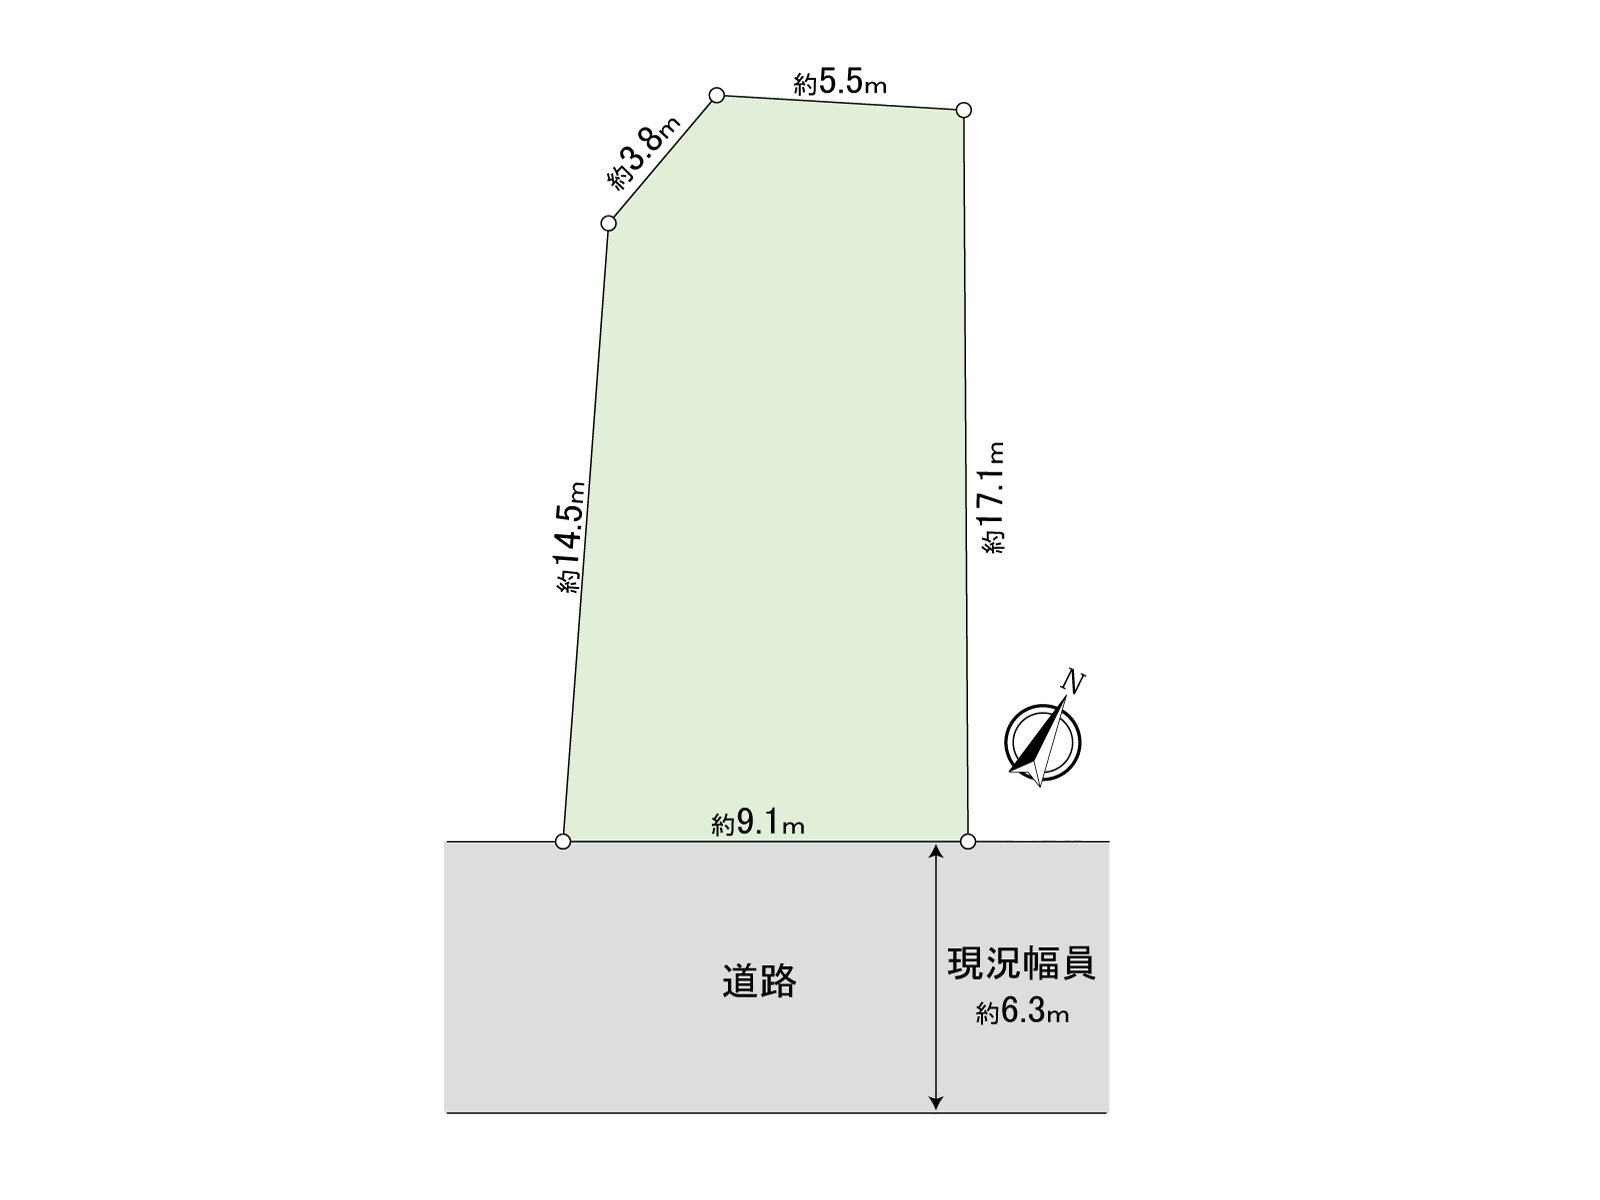 The Land area 144.54 square meters (about 43.72 tsubo). In the anterior surface of Southeast side road, width to be able to perform the cross-purposes between cars smoothly is secured.